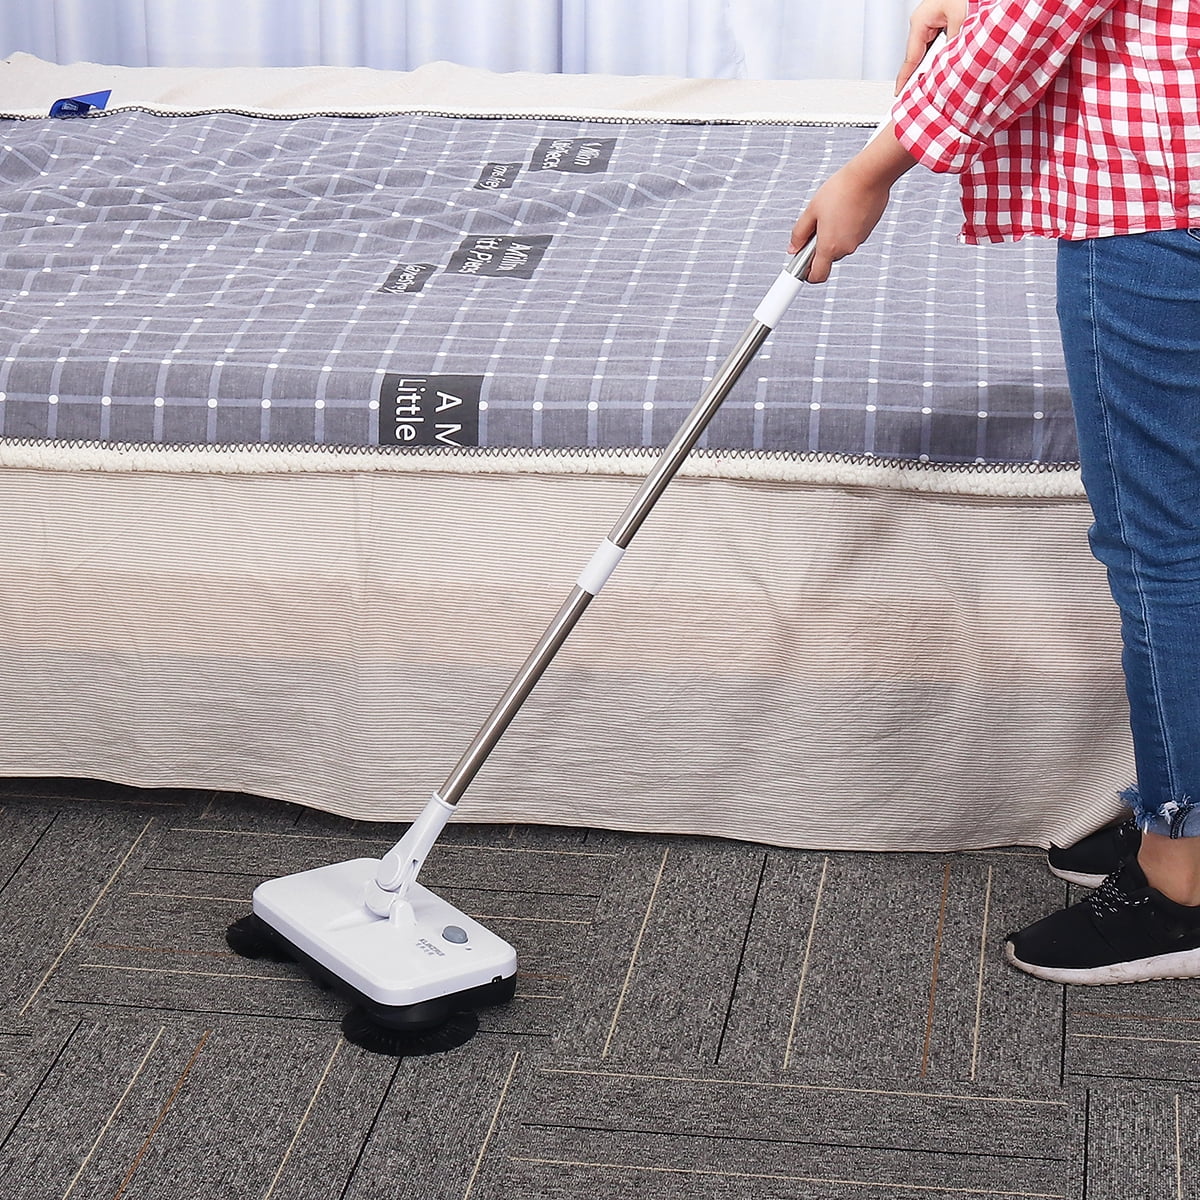 Non-Electric 360 Degree Rotating Cleaning Sweeper Tool Lightweight Dustbin All in One! Spinning Cordless Push-Power Broom 3 in 1 Sweep Easy to Use Scrub Safe